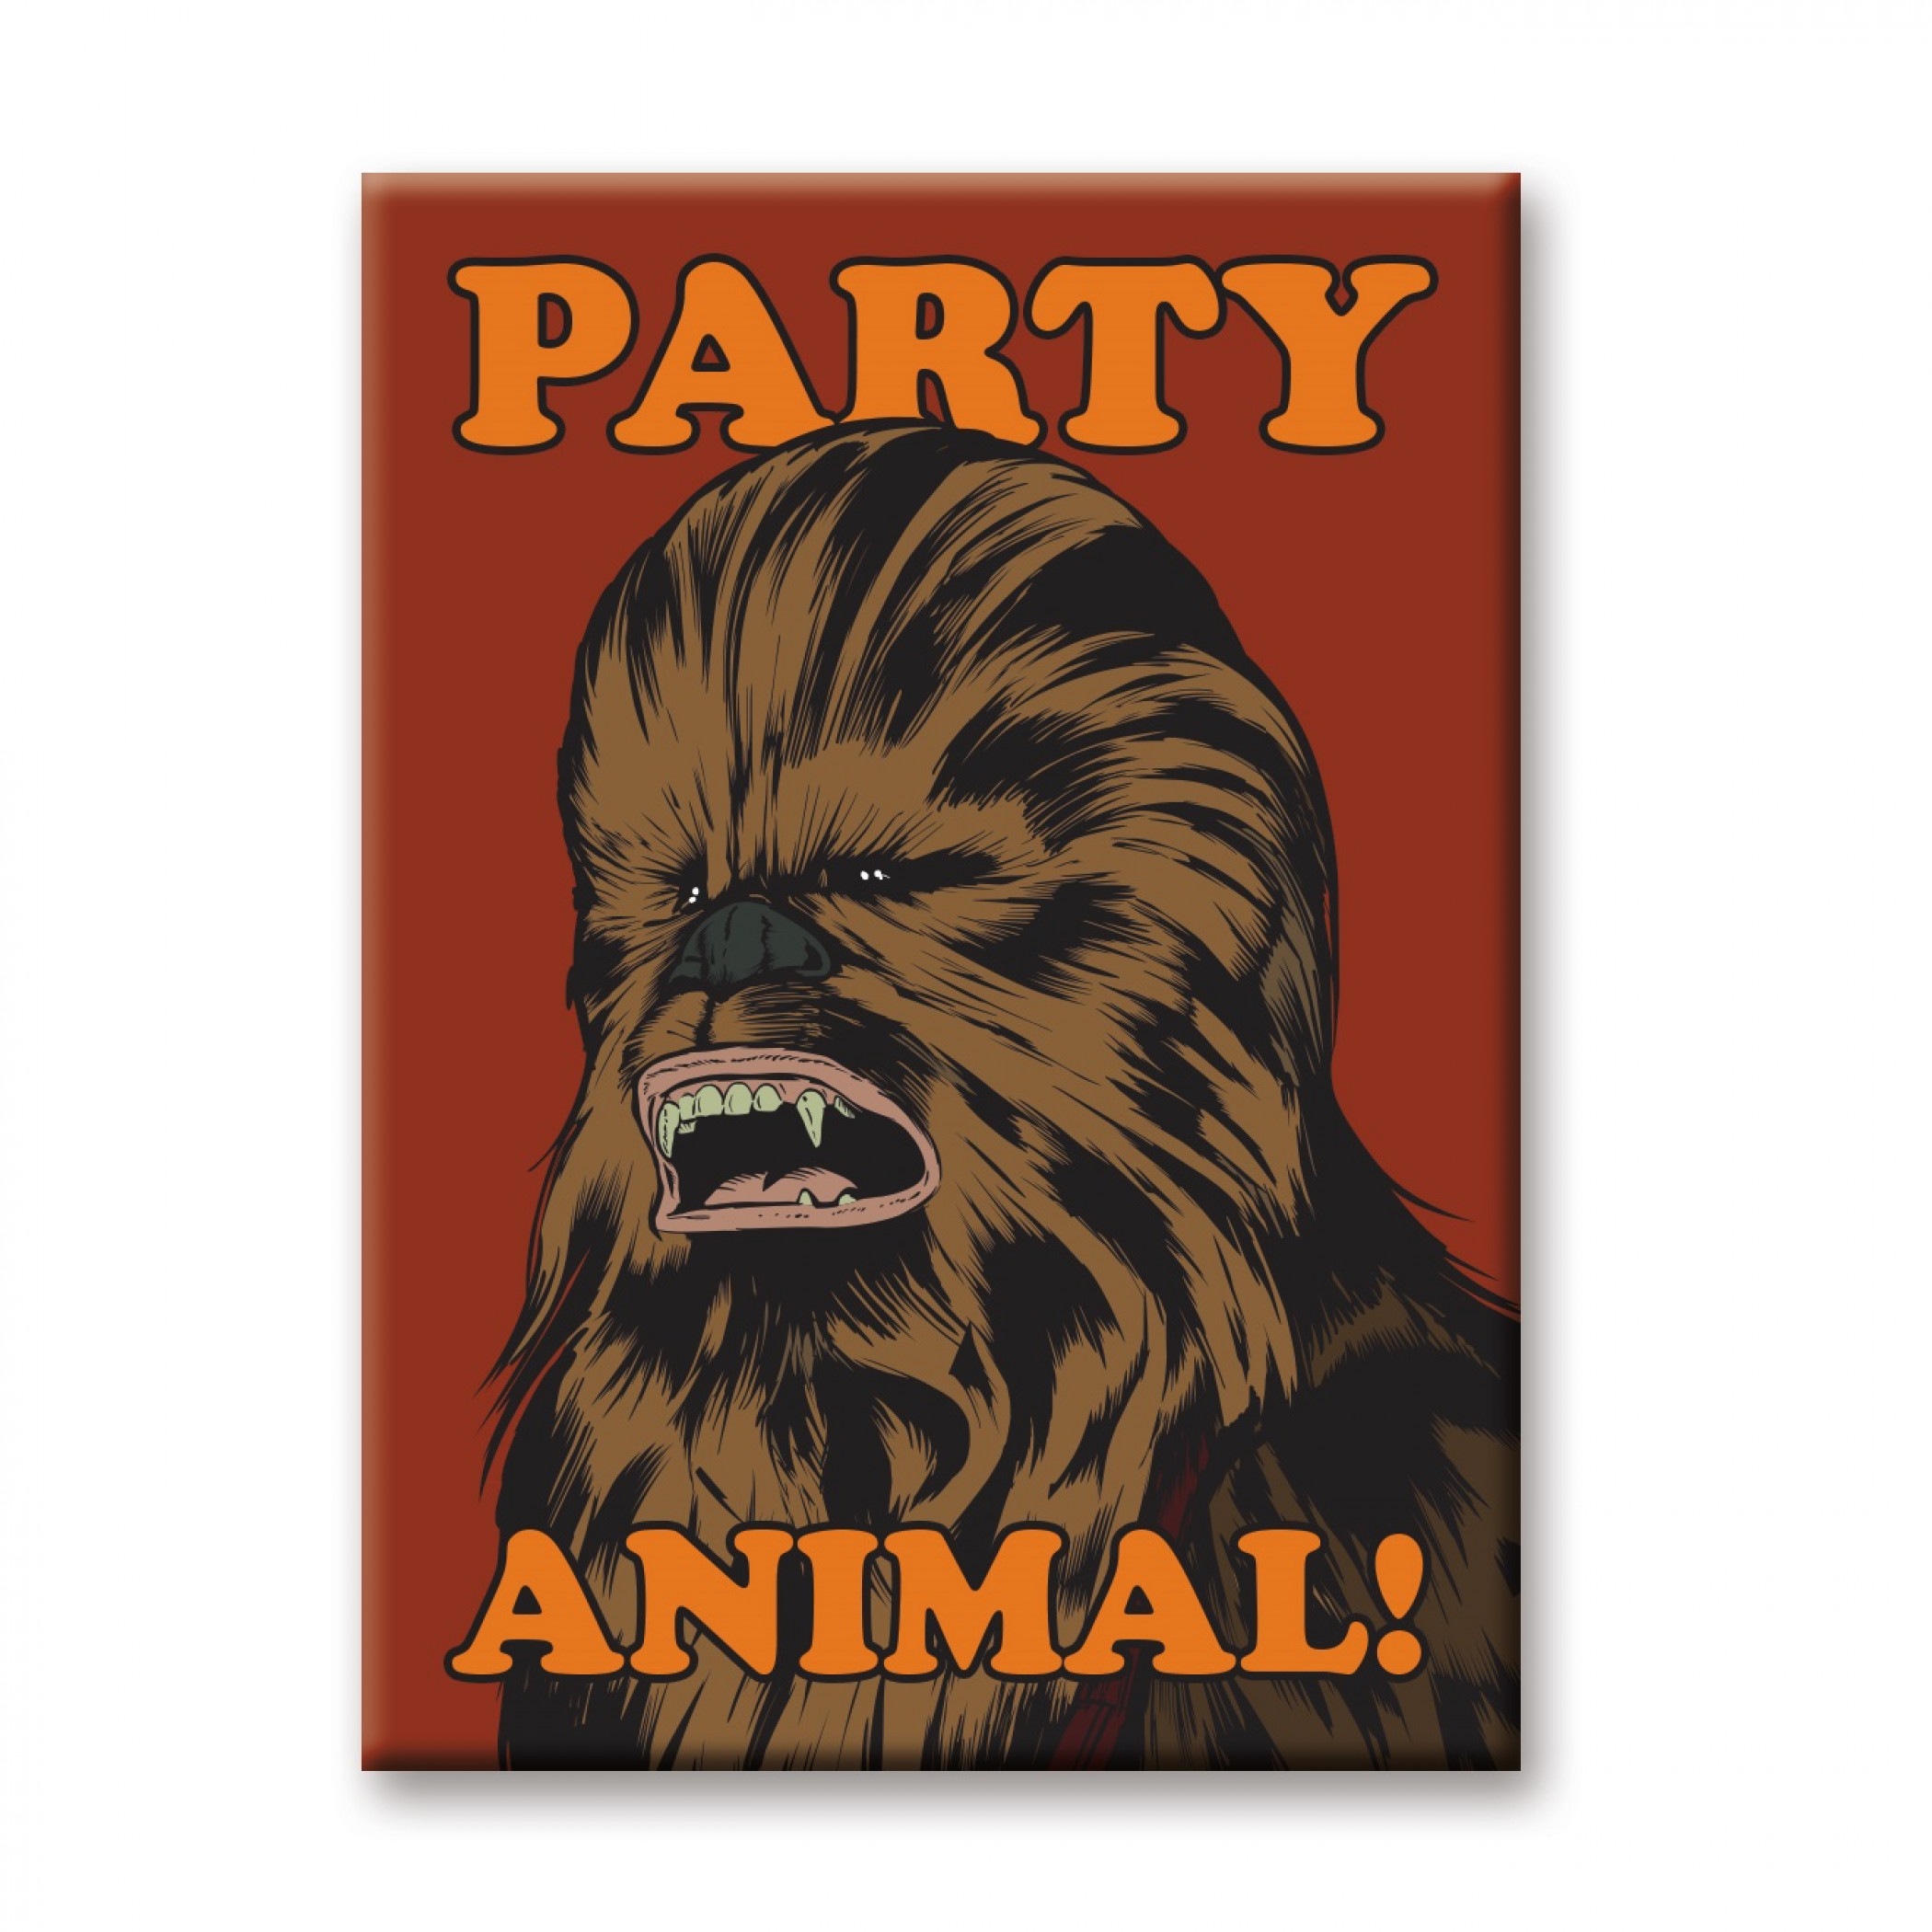 Chewbacca Party Animal Magnet